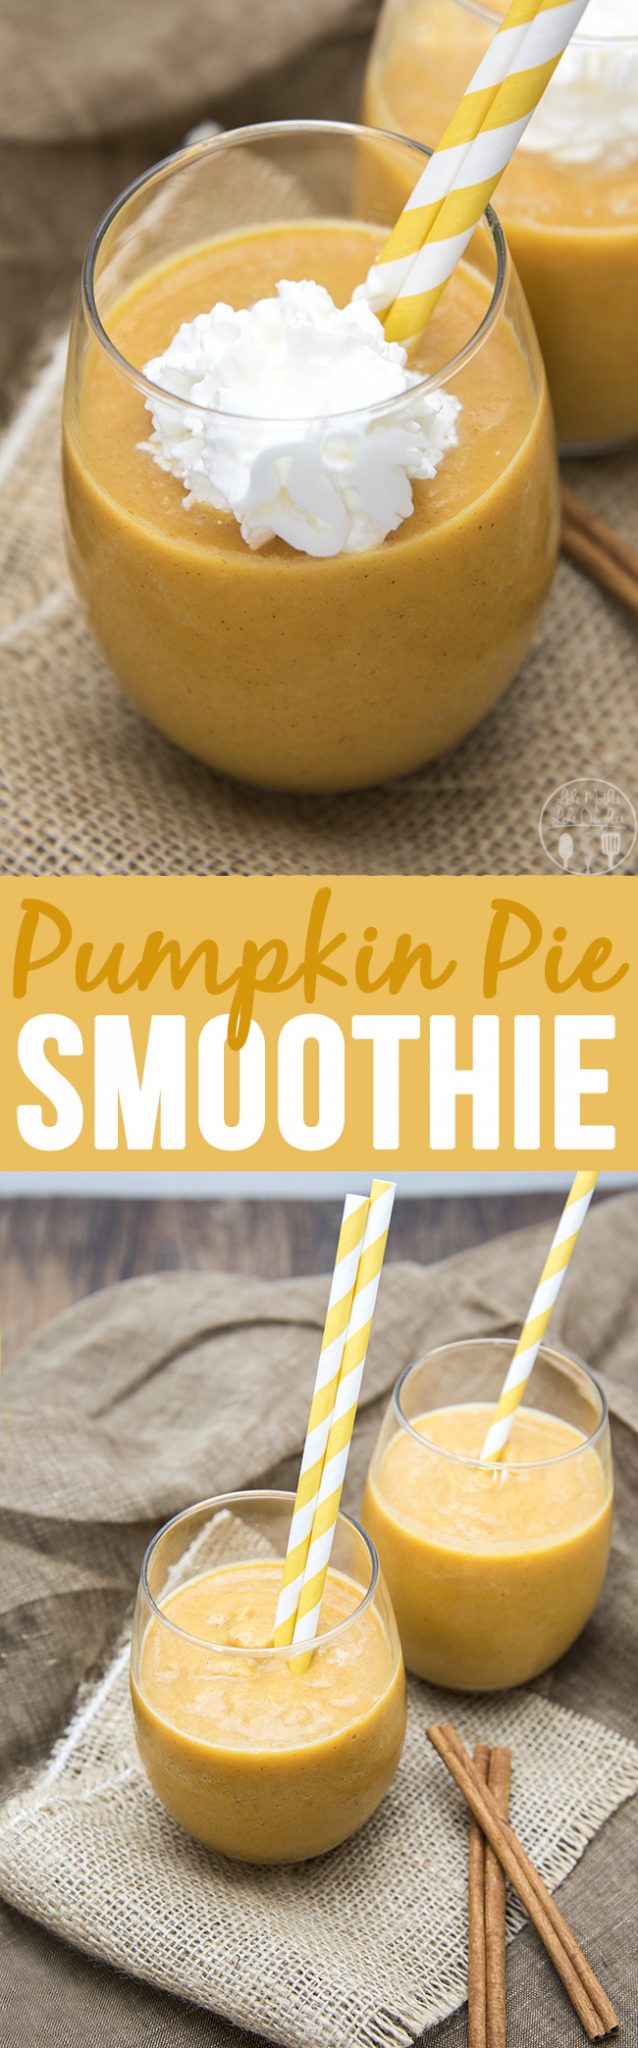 Pumpkin Pie Smoothie - This creamy and silky smoothie tastes just like a slice of pumpkin pie, in smoothie form!